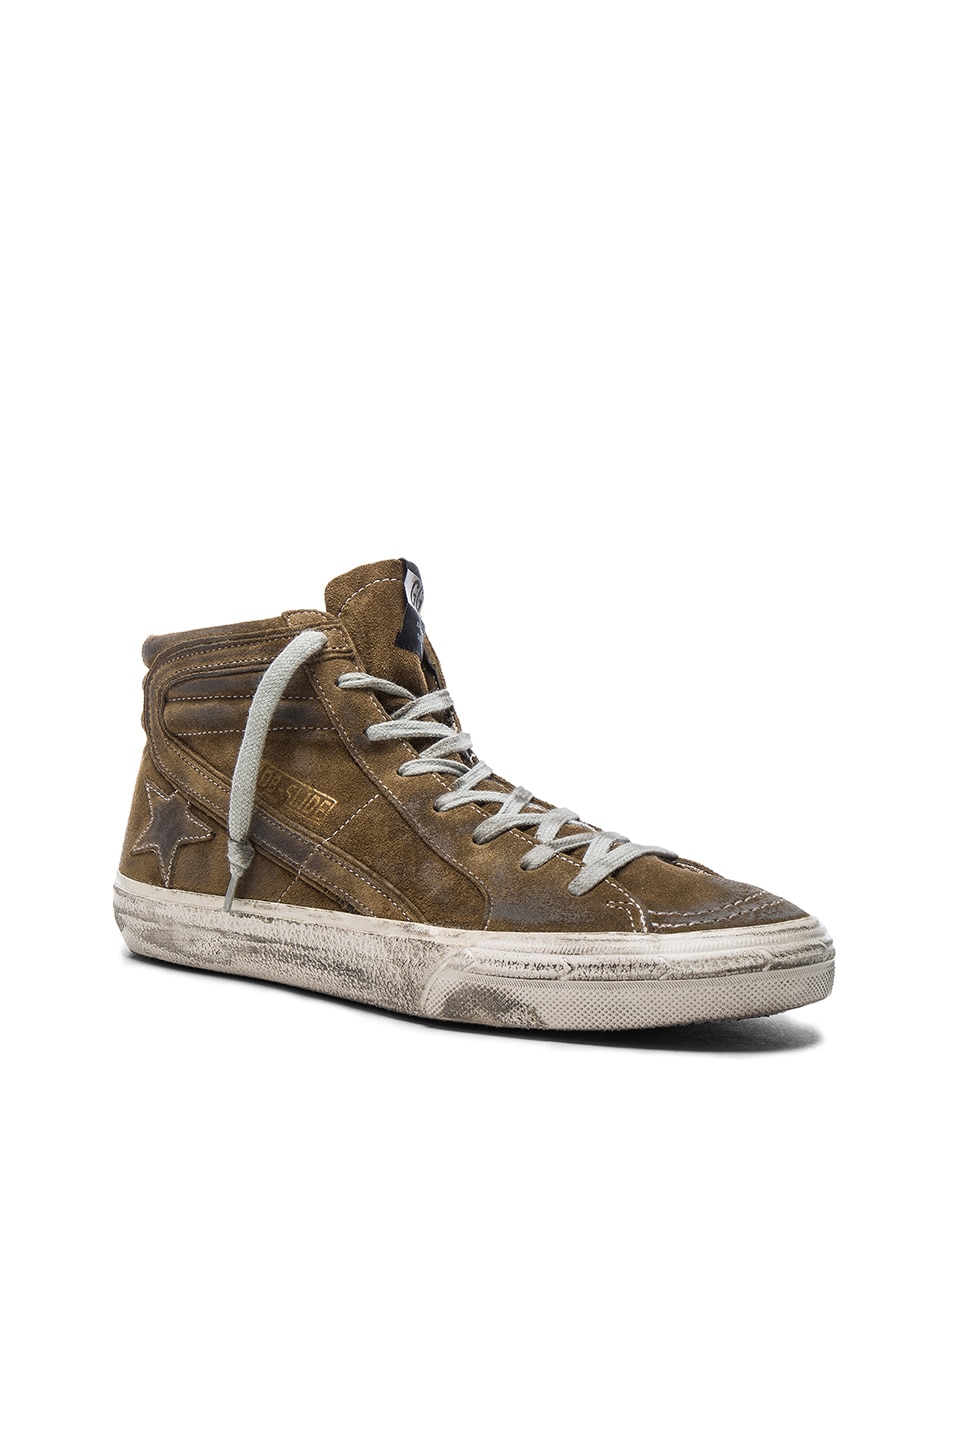 Image 1 of Golden Goose Suede Slide Sneakers in Military Suede & Bluette